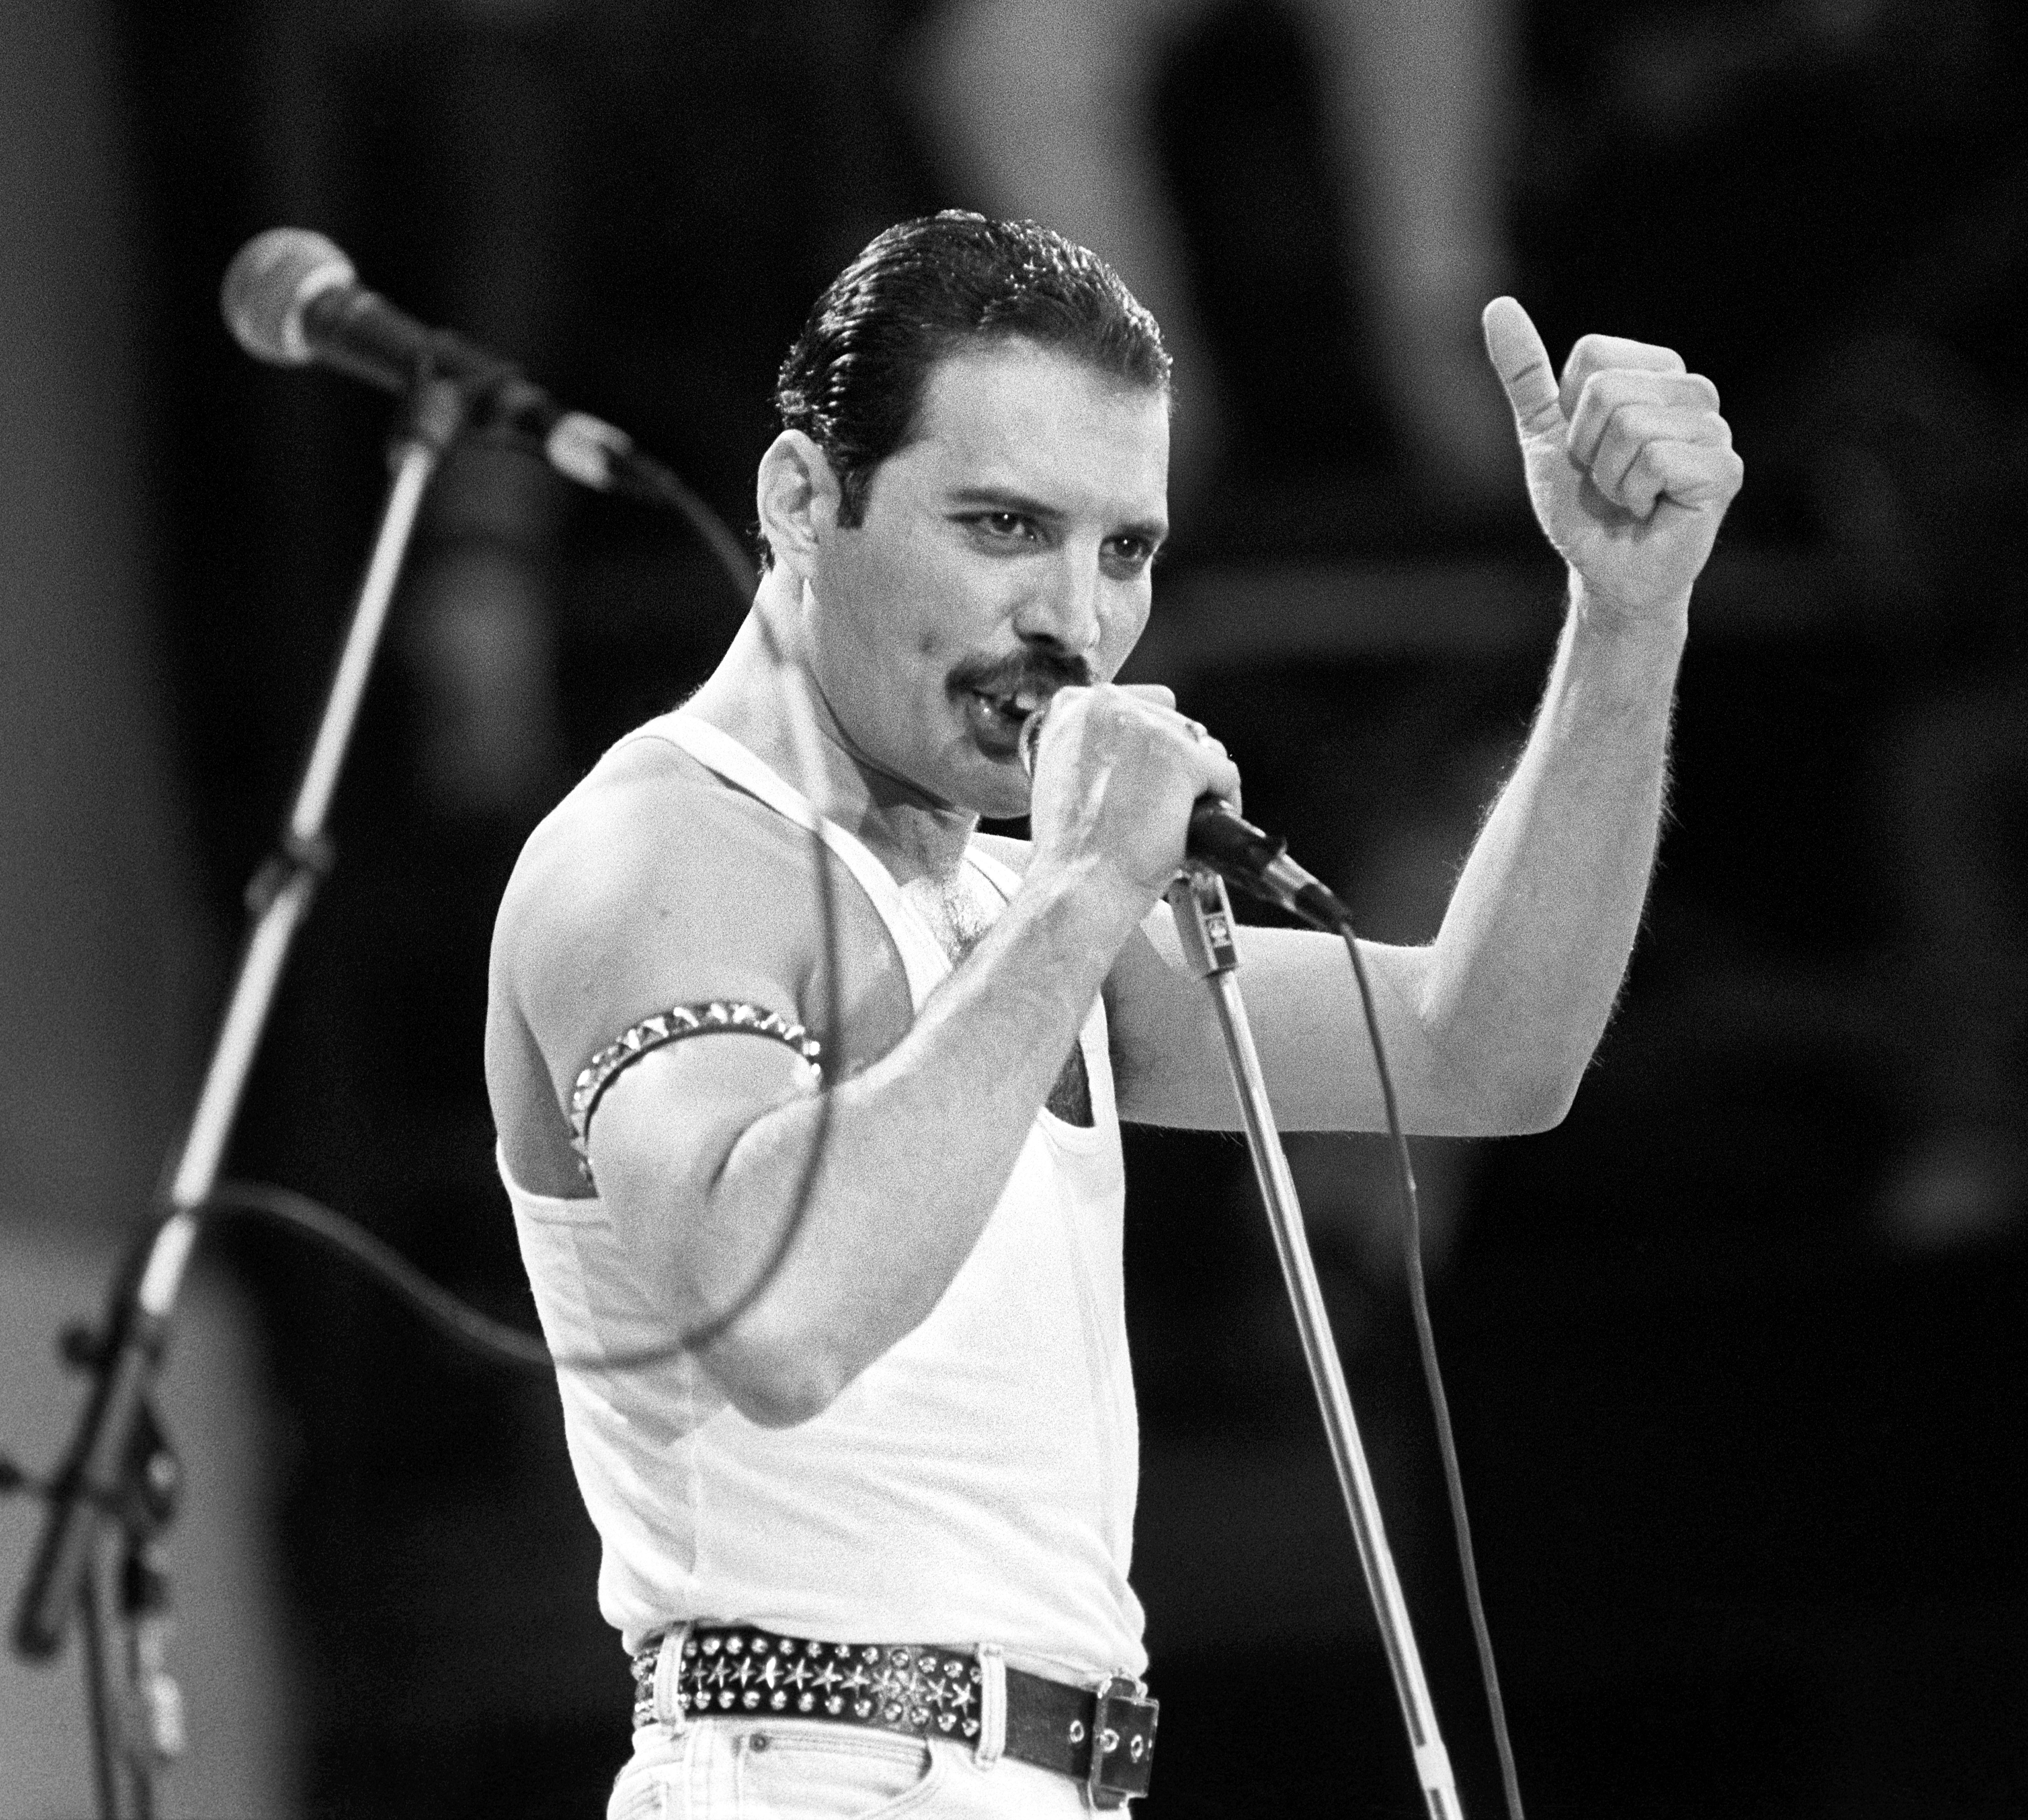  BOHEMIAN RHAPSODY VOTED UK’S TOP DRIVING SONG – NEW RESEARCH 